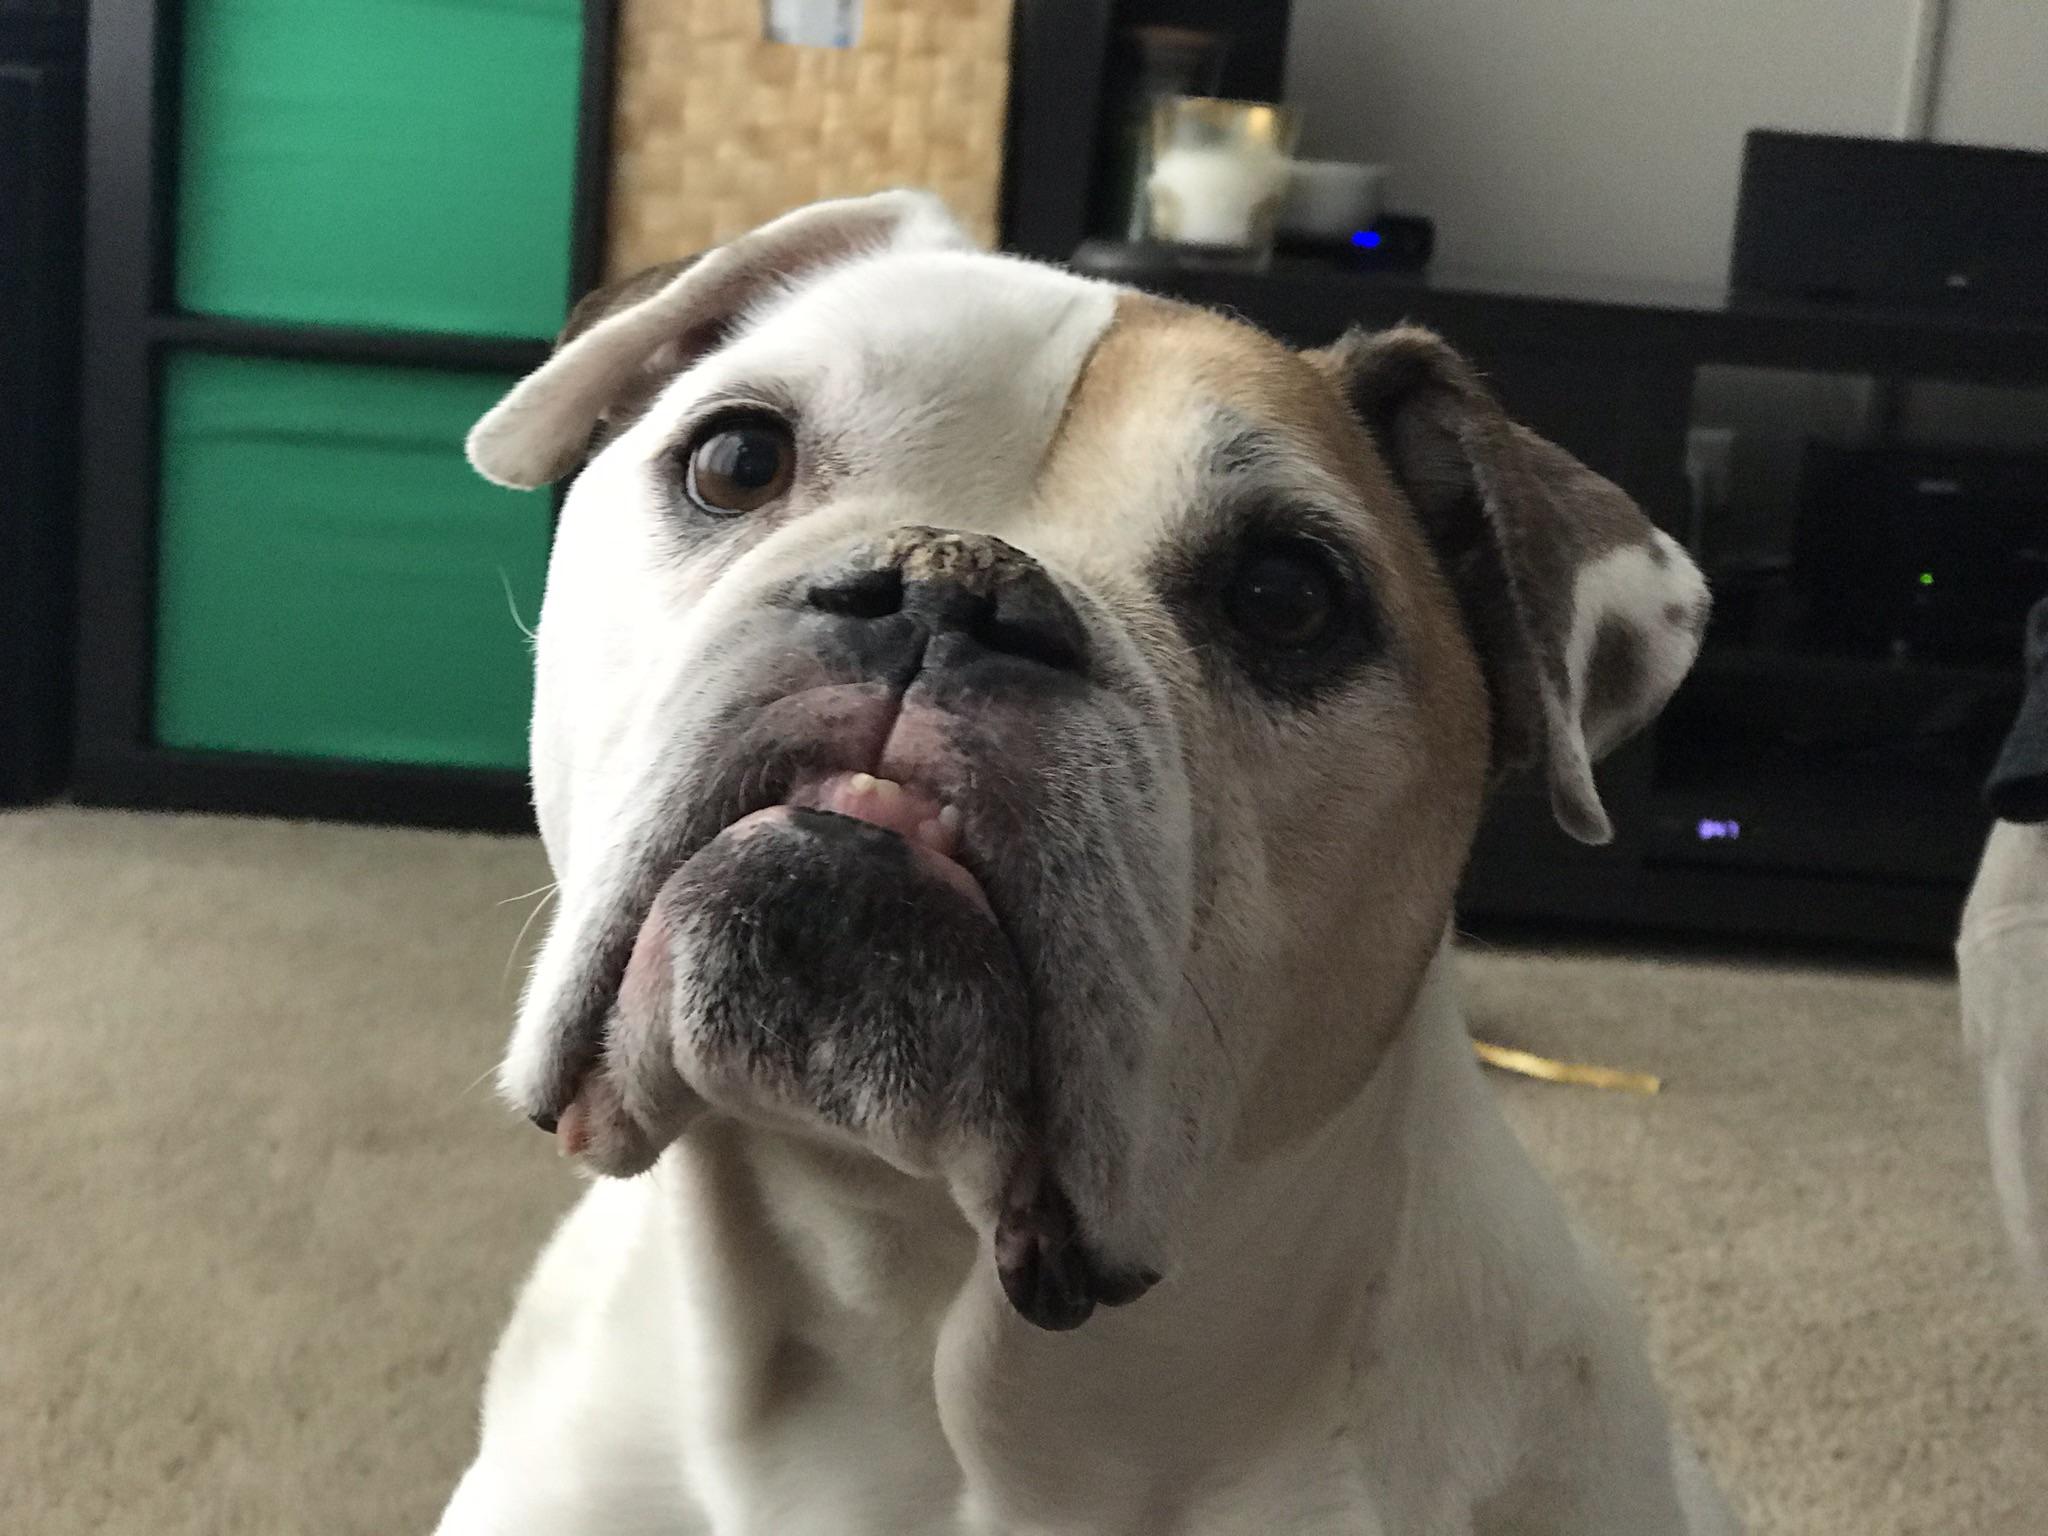 Lost my Victorian Bulldog 1 year ago today. He was the best dog